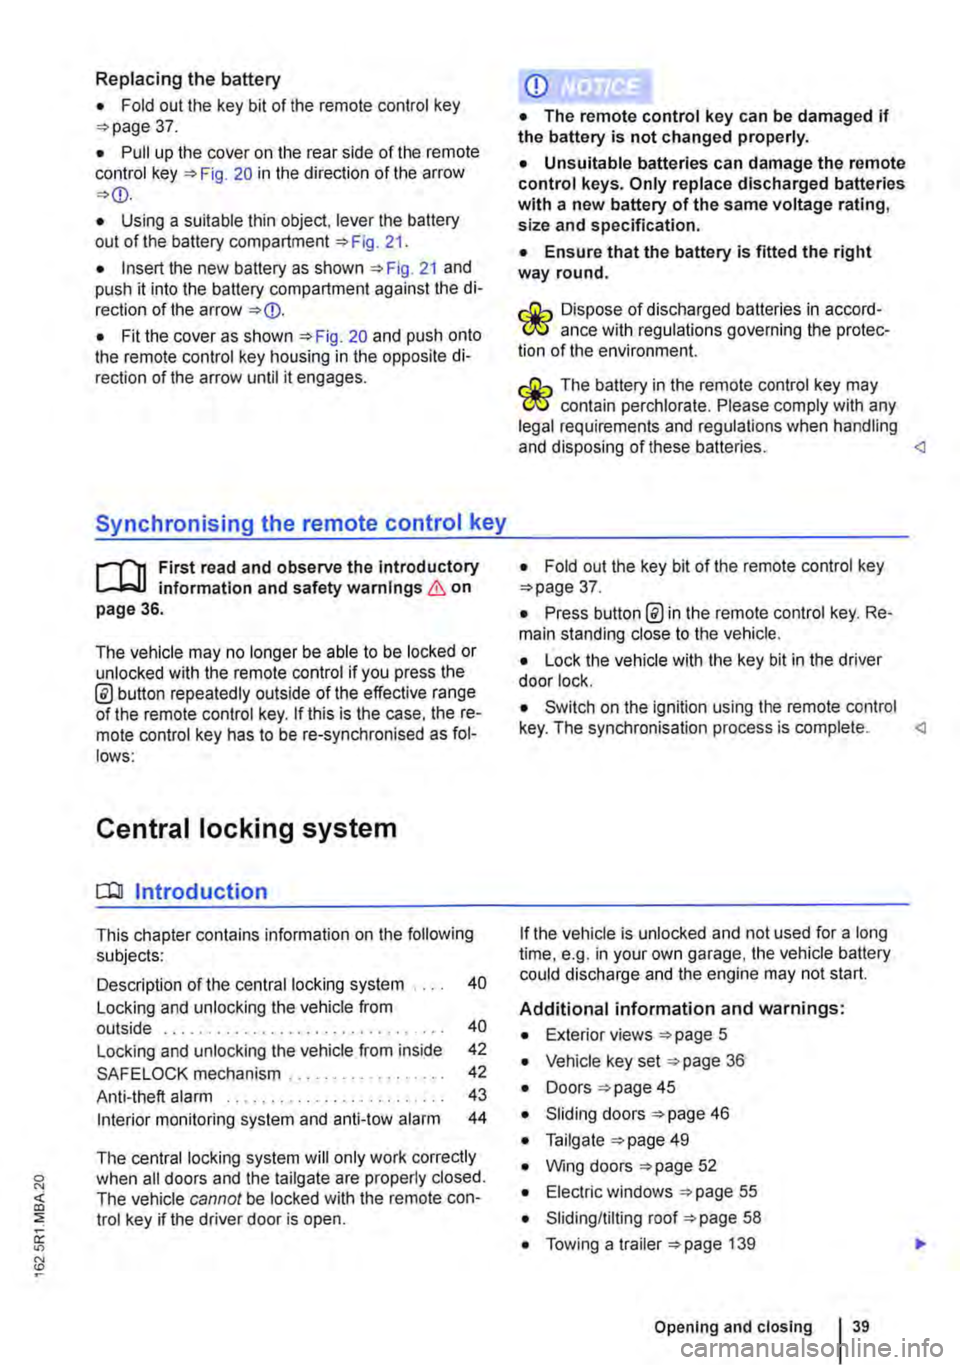 VOLKSWAGEN TRANSPORTER 2012  Owners Manual Replacing the battery 
• Fold out the key bit of the remote control key =>page 37. 
• Pull up the cover on the rear side of the remote control key =>Fig. 20 in the direction of the arrow =><D. 
�